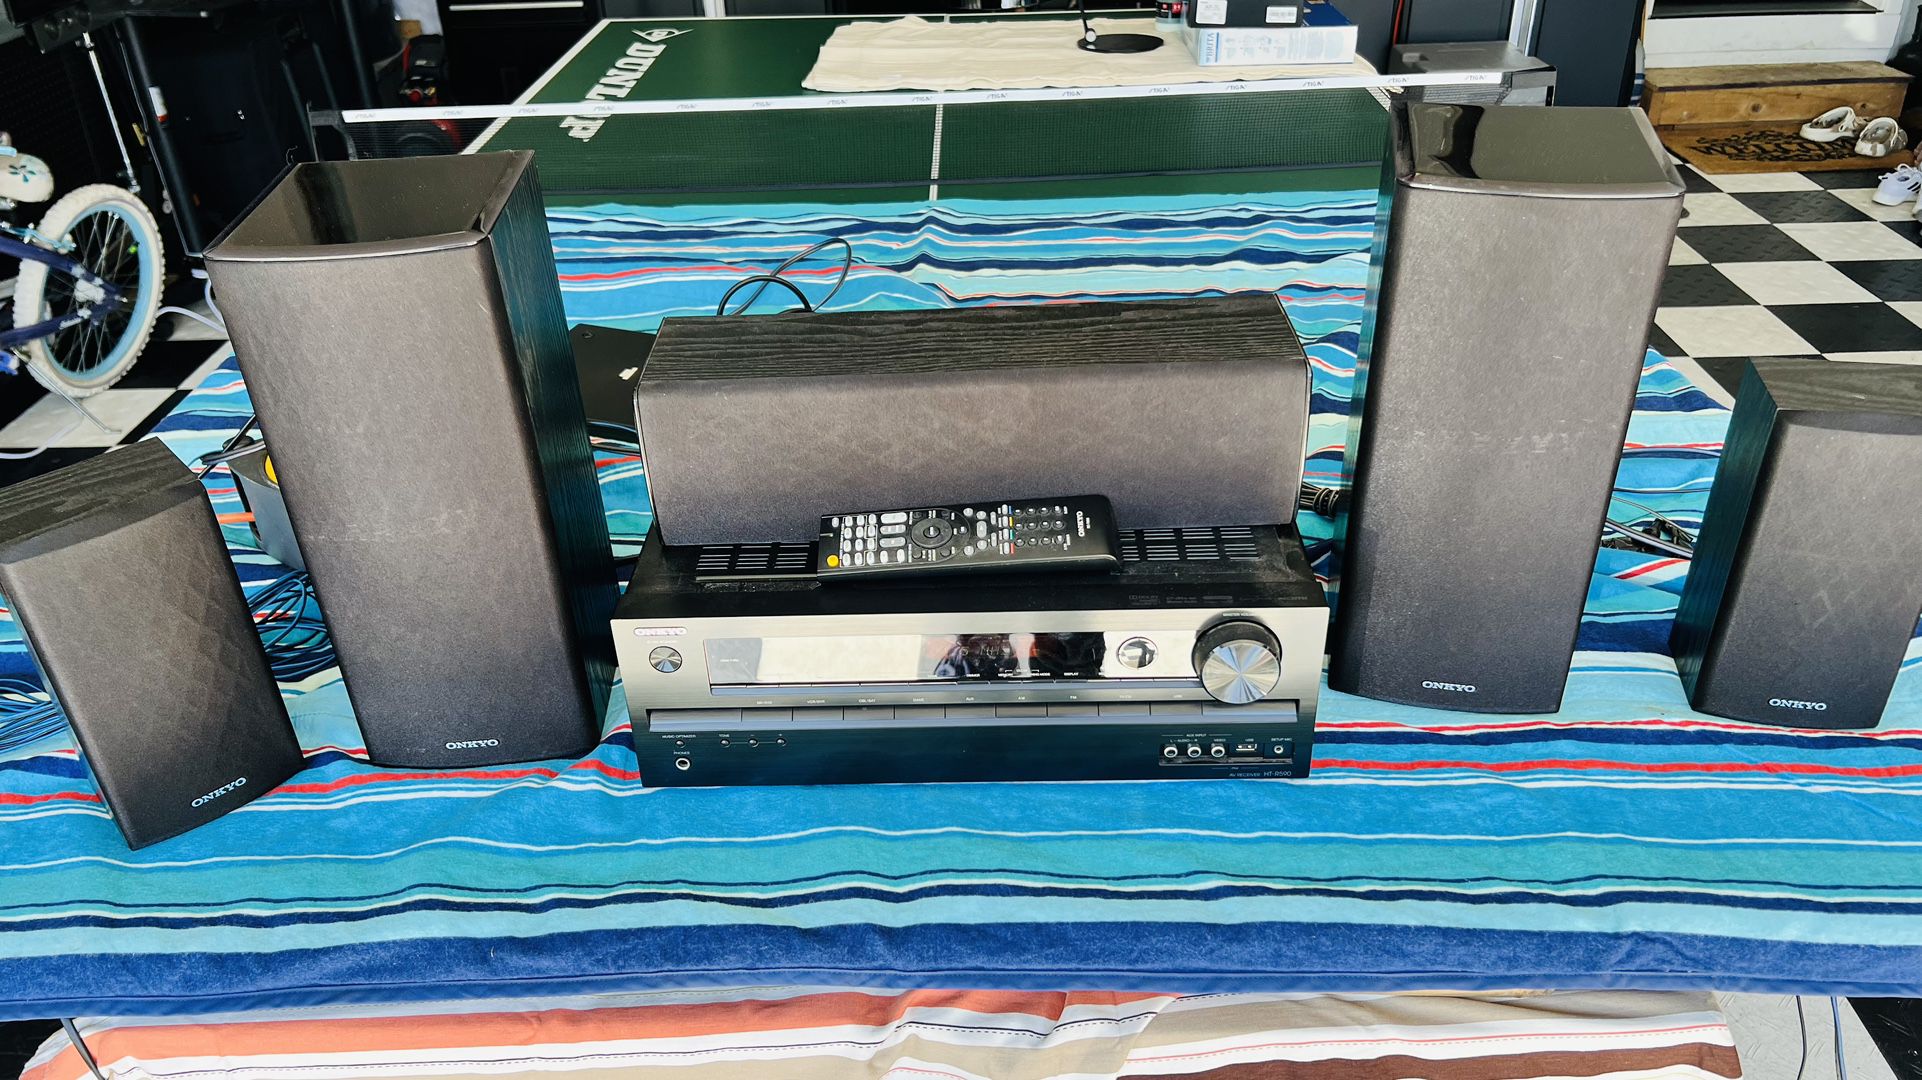 Onkyo HT-R590 surround complete set with 5 speakers and subwoofer.  https://offerup.co/faYXKzQFnY?$deeplink_path=/redirect/